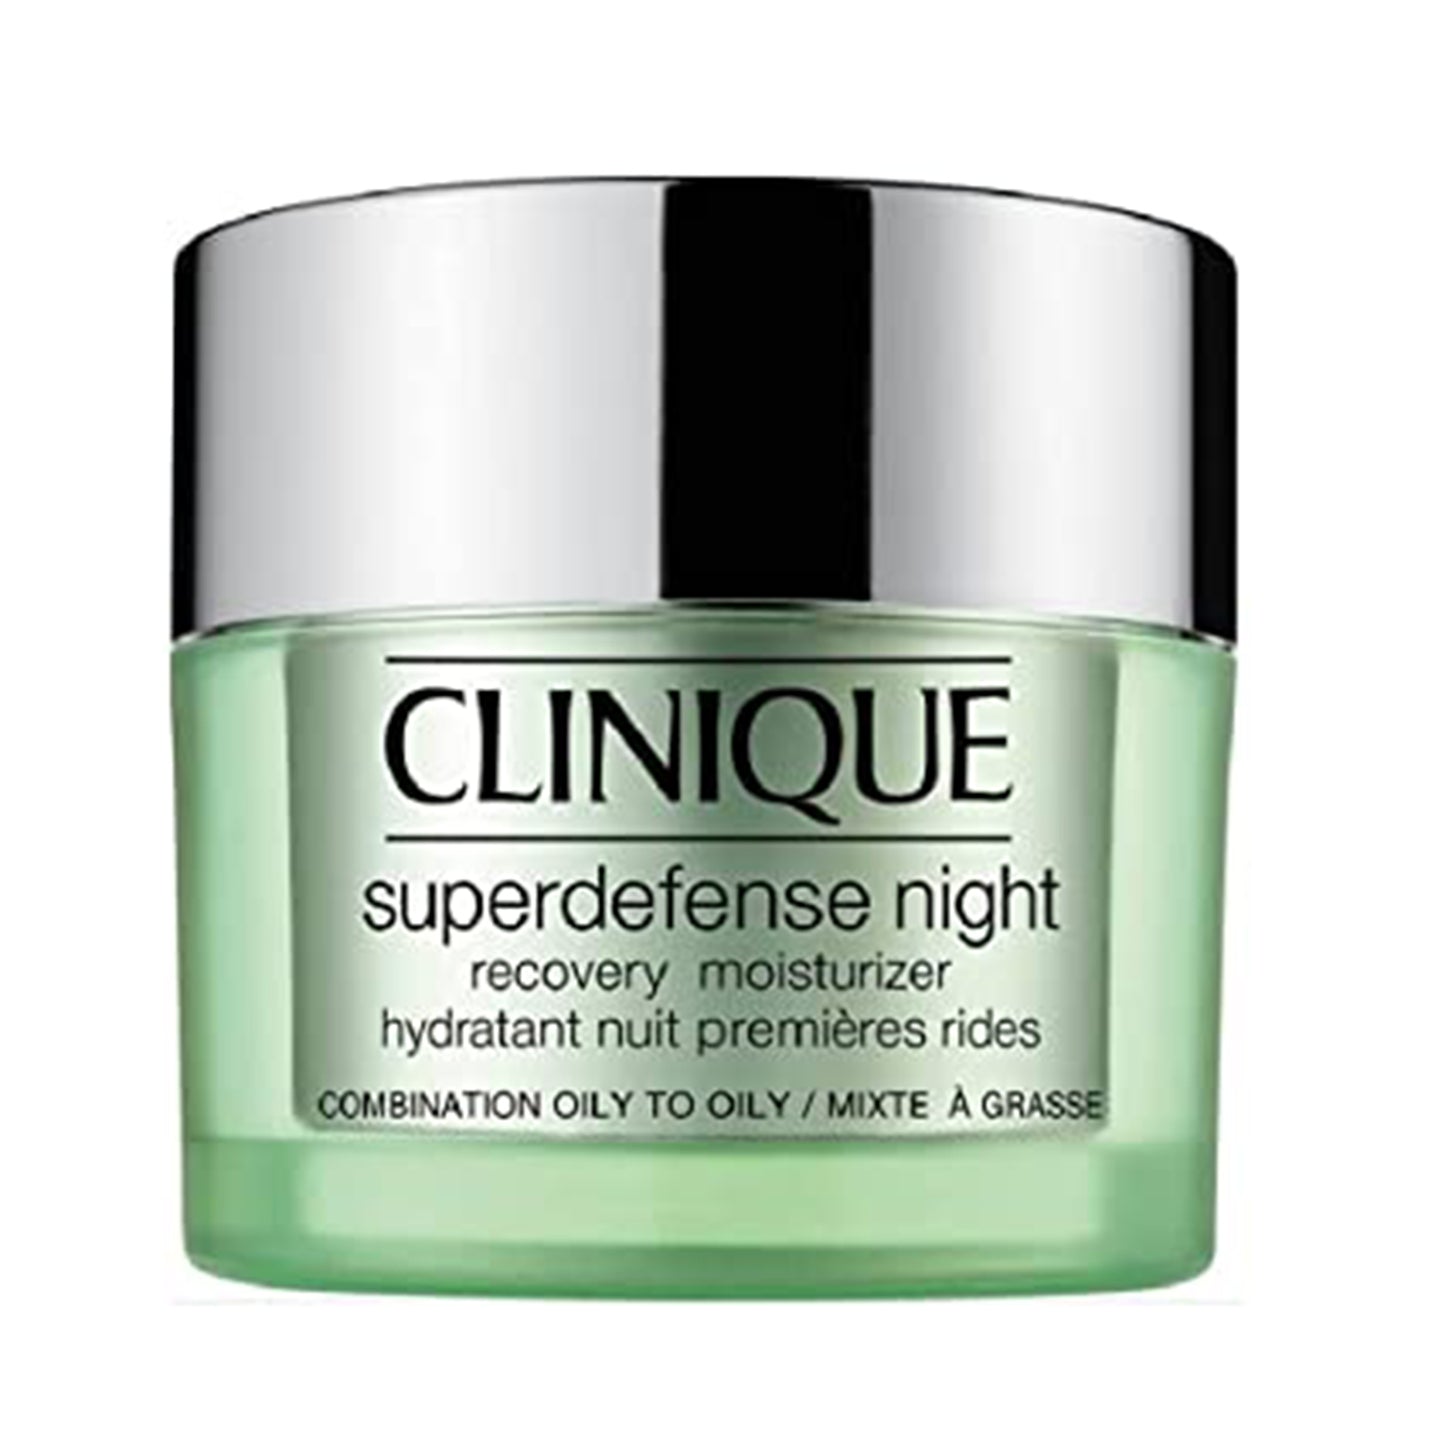 Clinique Superdefense Night Recovery Moisturizer - Combination Oily to Oily 1.7 oz